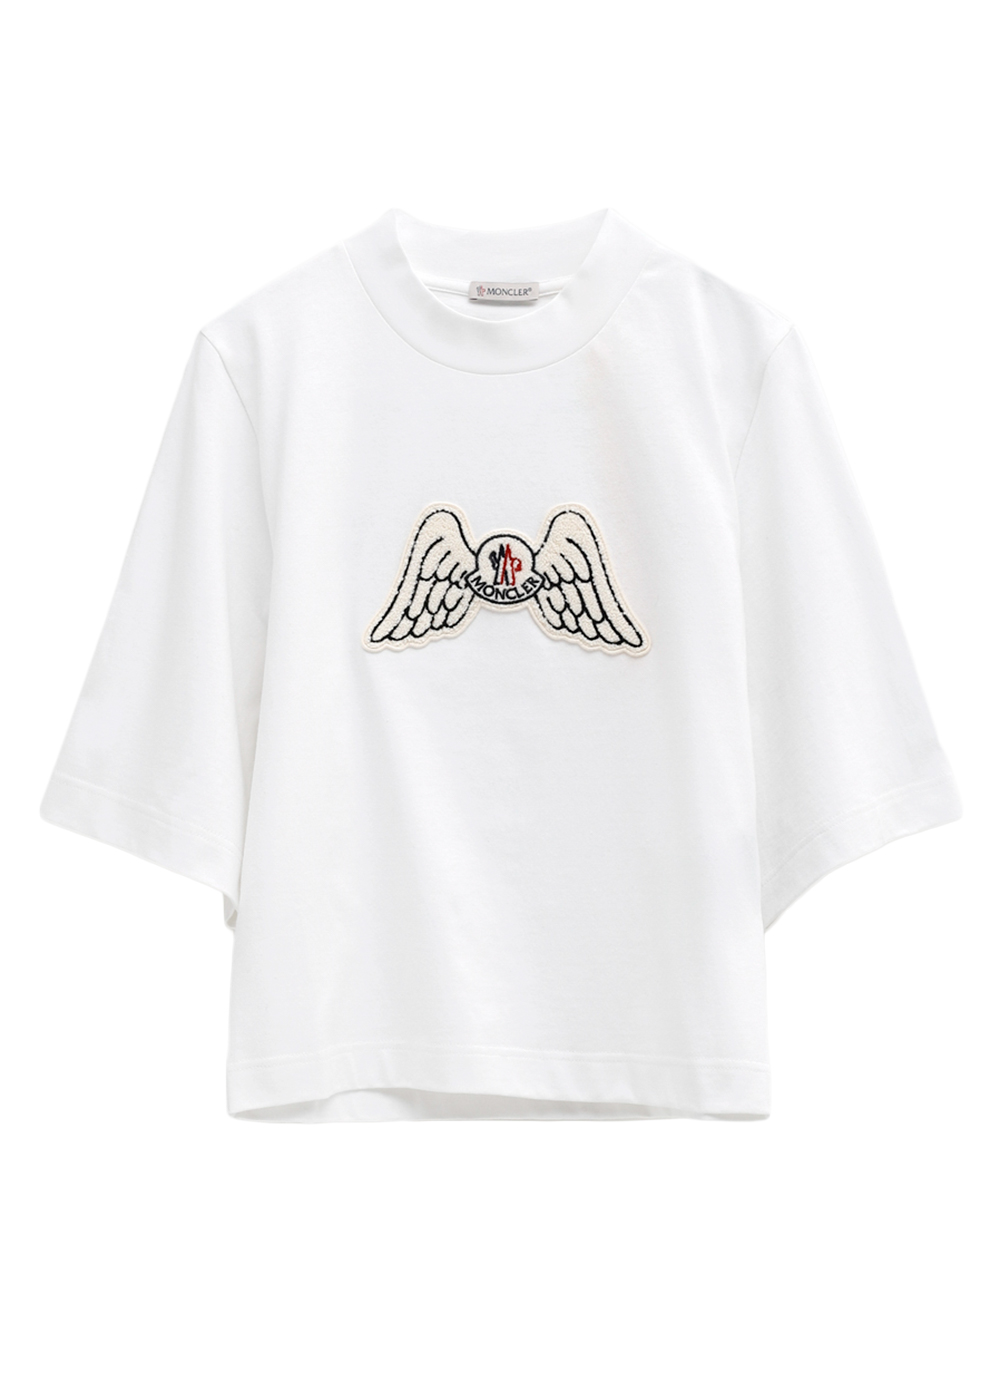 Moncler x Palm Angels Mock Neck Wings T-Shirt White メンズ - FW21 - JP